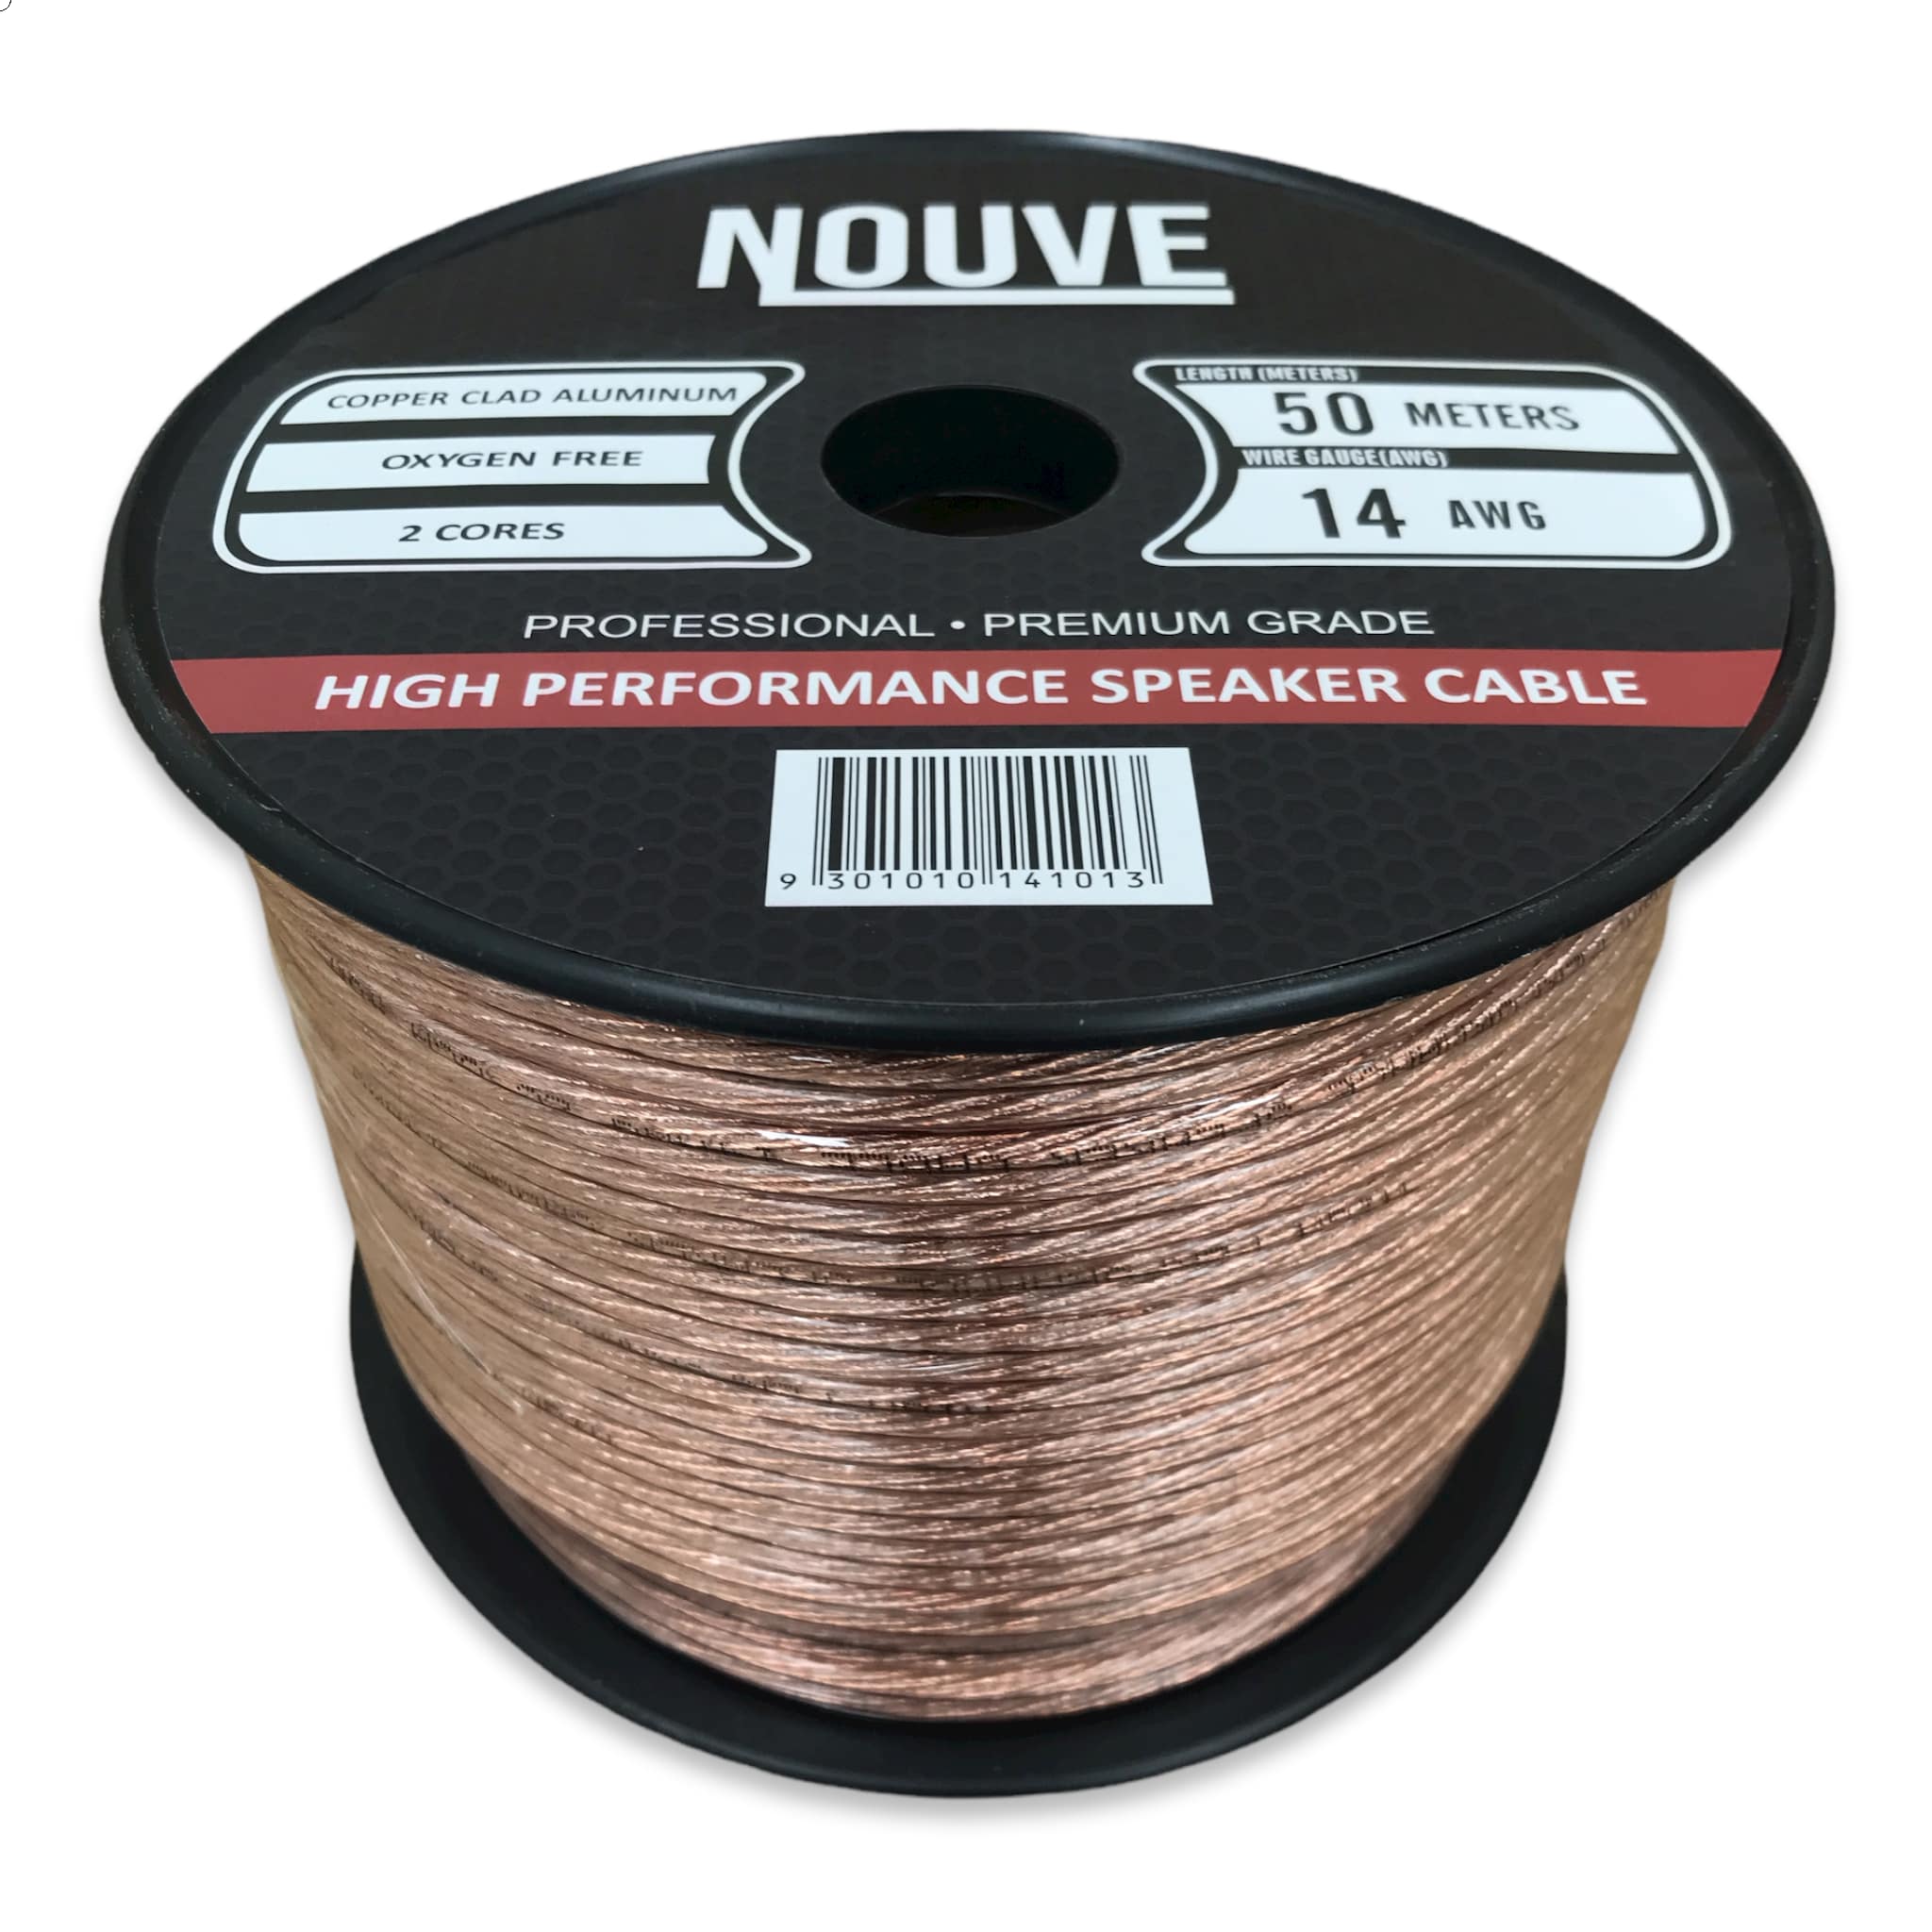 14 awg speaker cable cca 50m